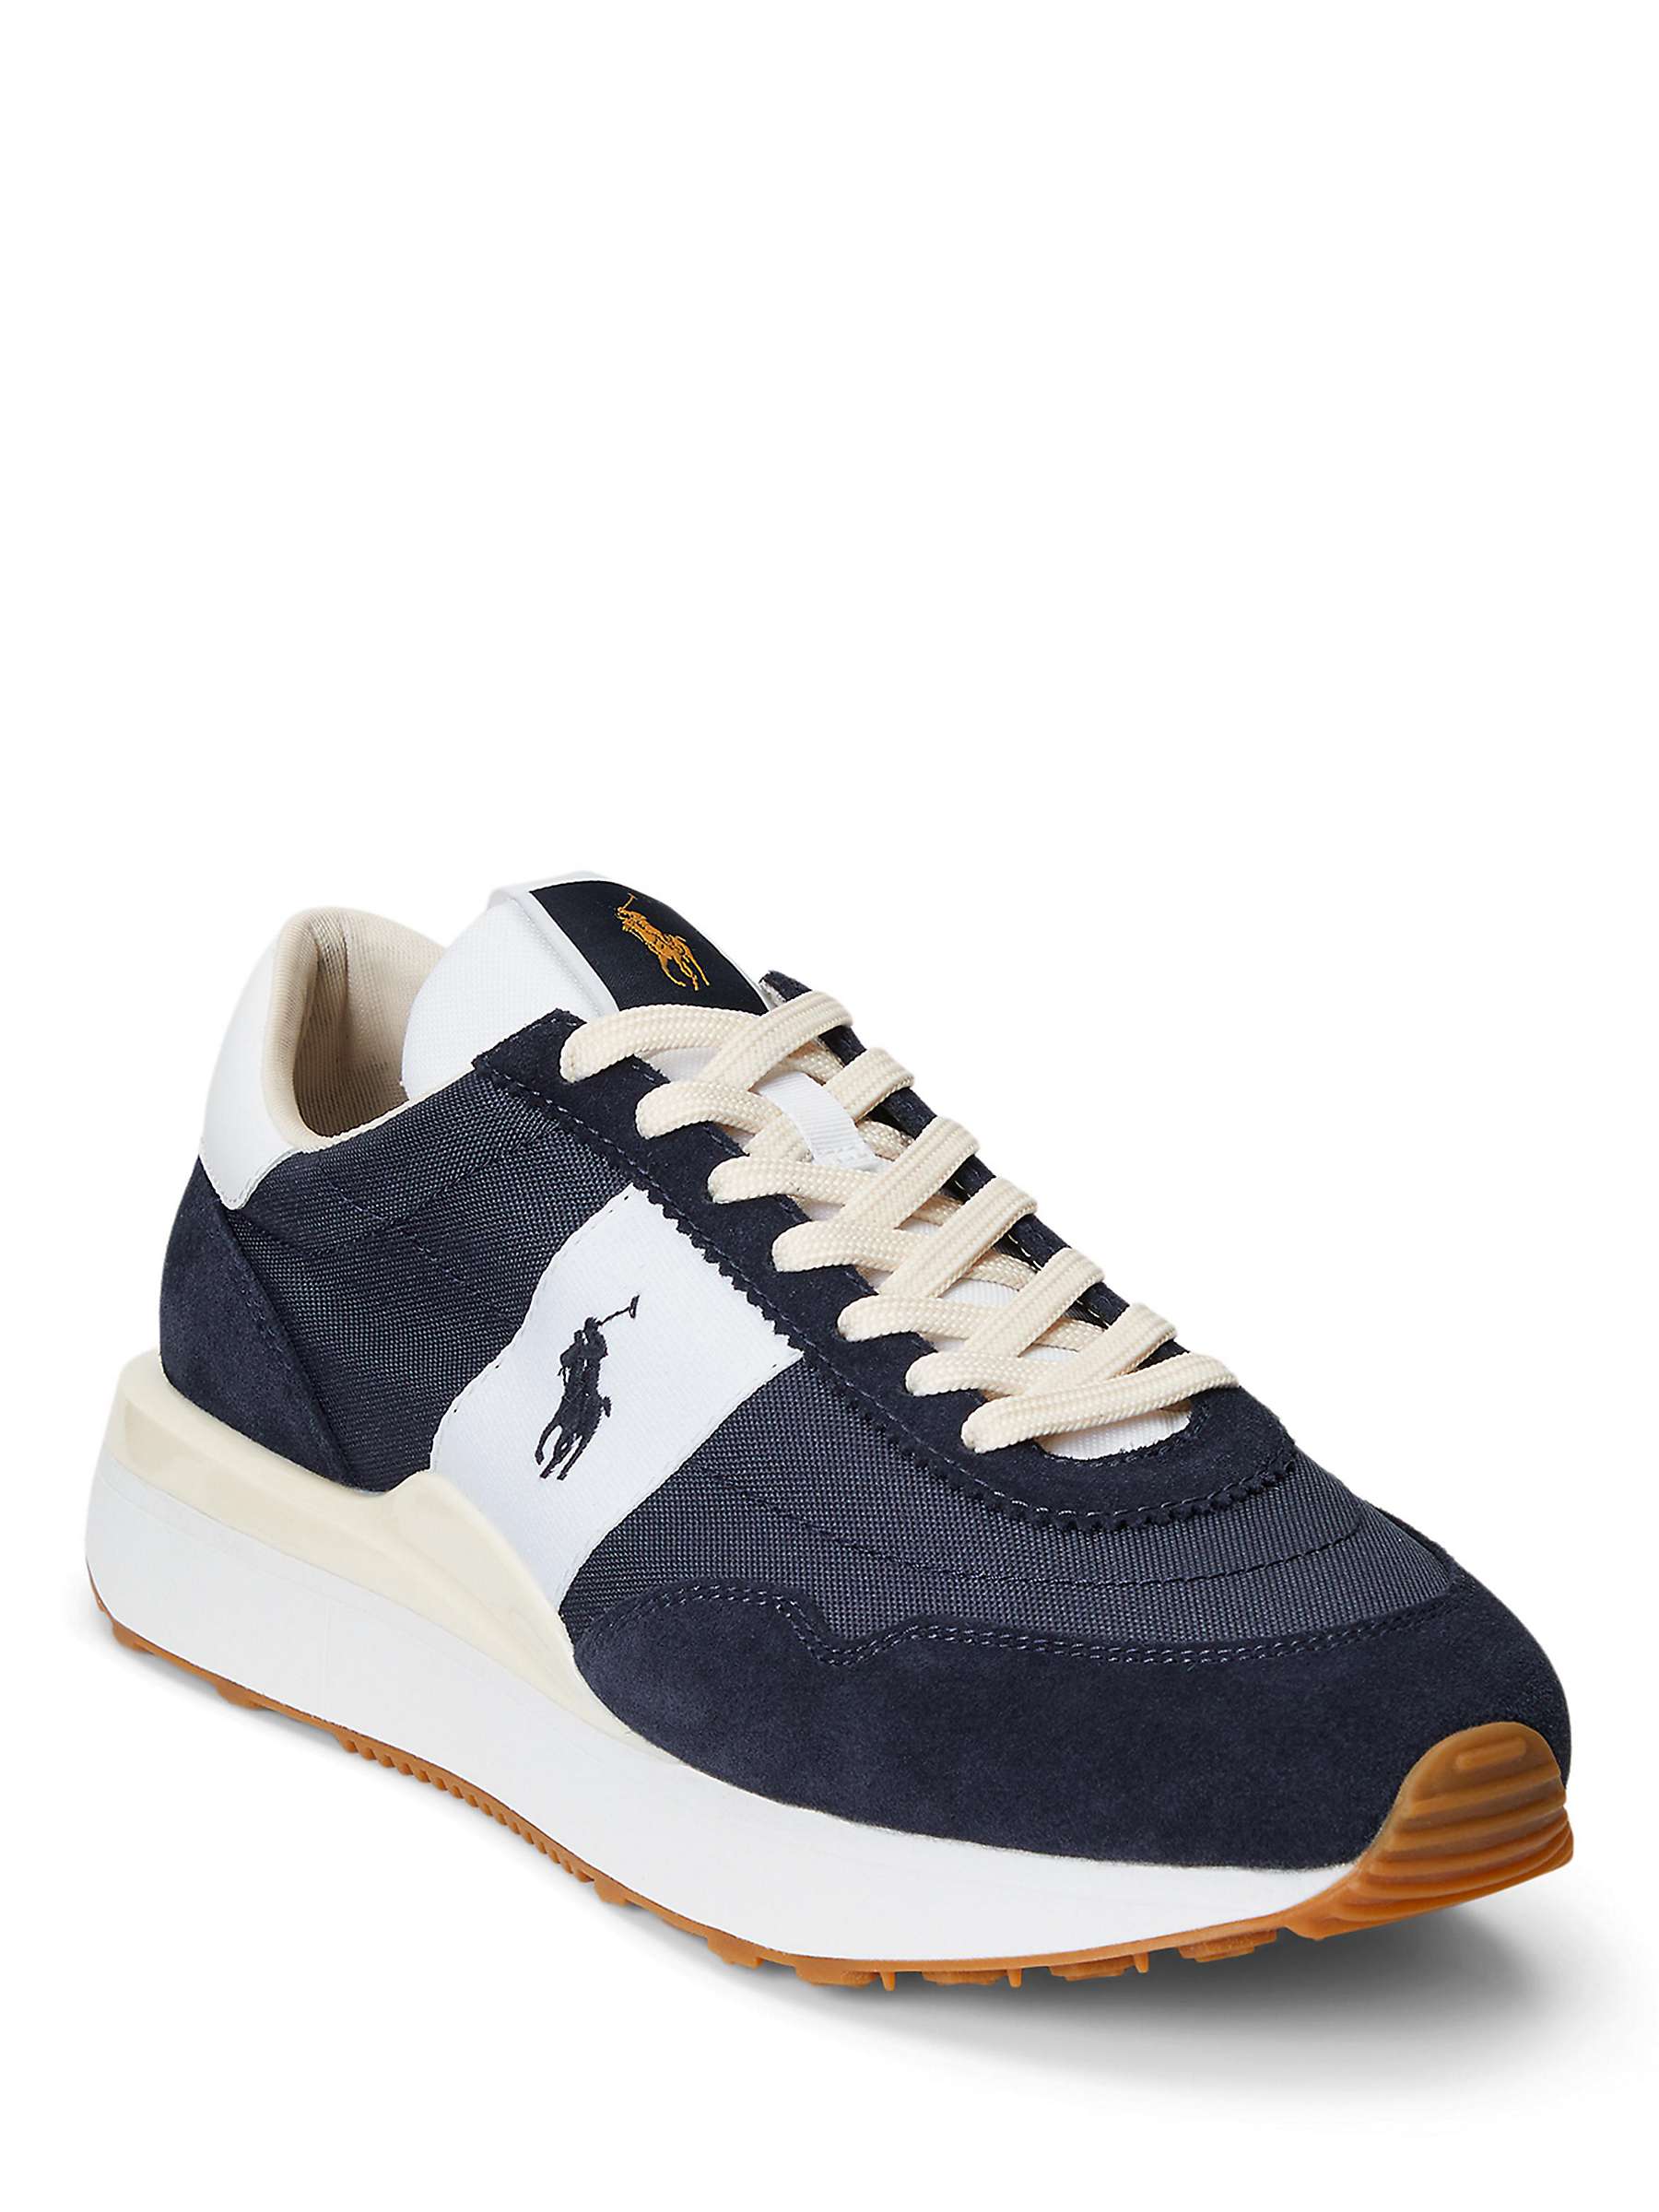 Buy Polo Ralph Lauren Train 89 Suede Trainers Online at johnlewis.com